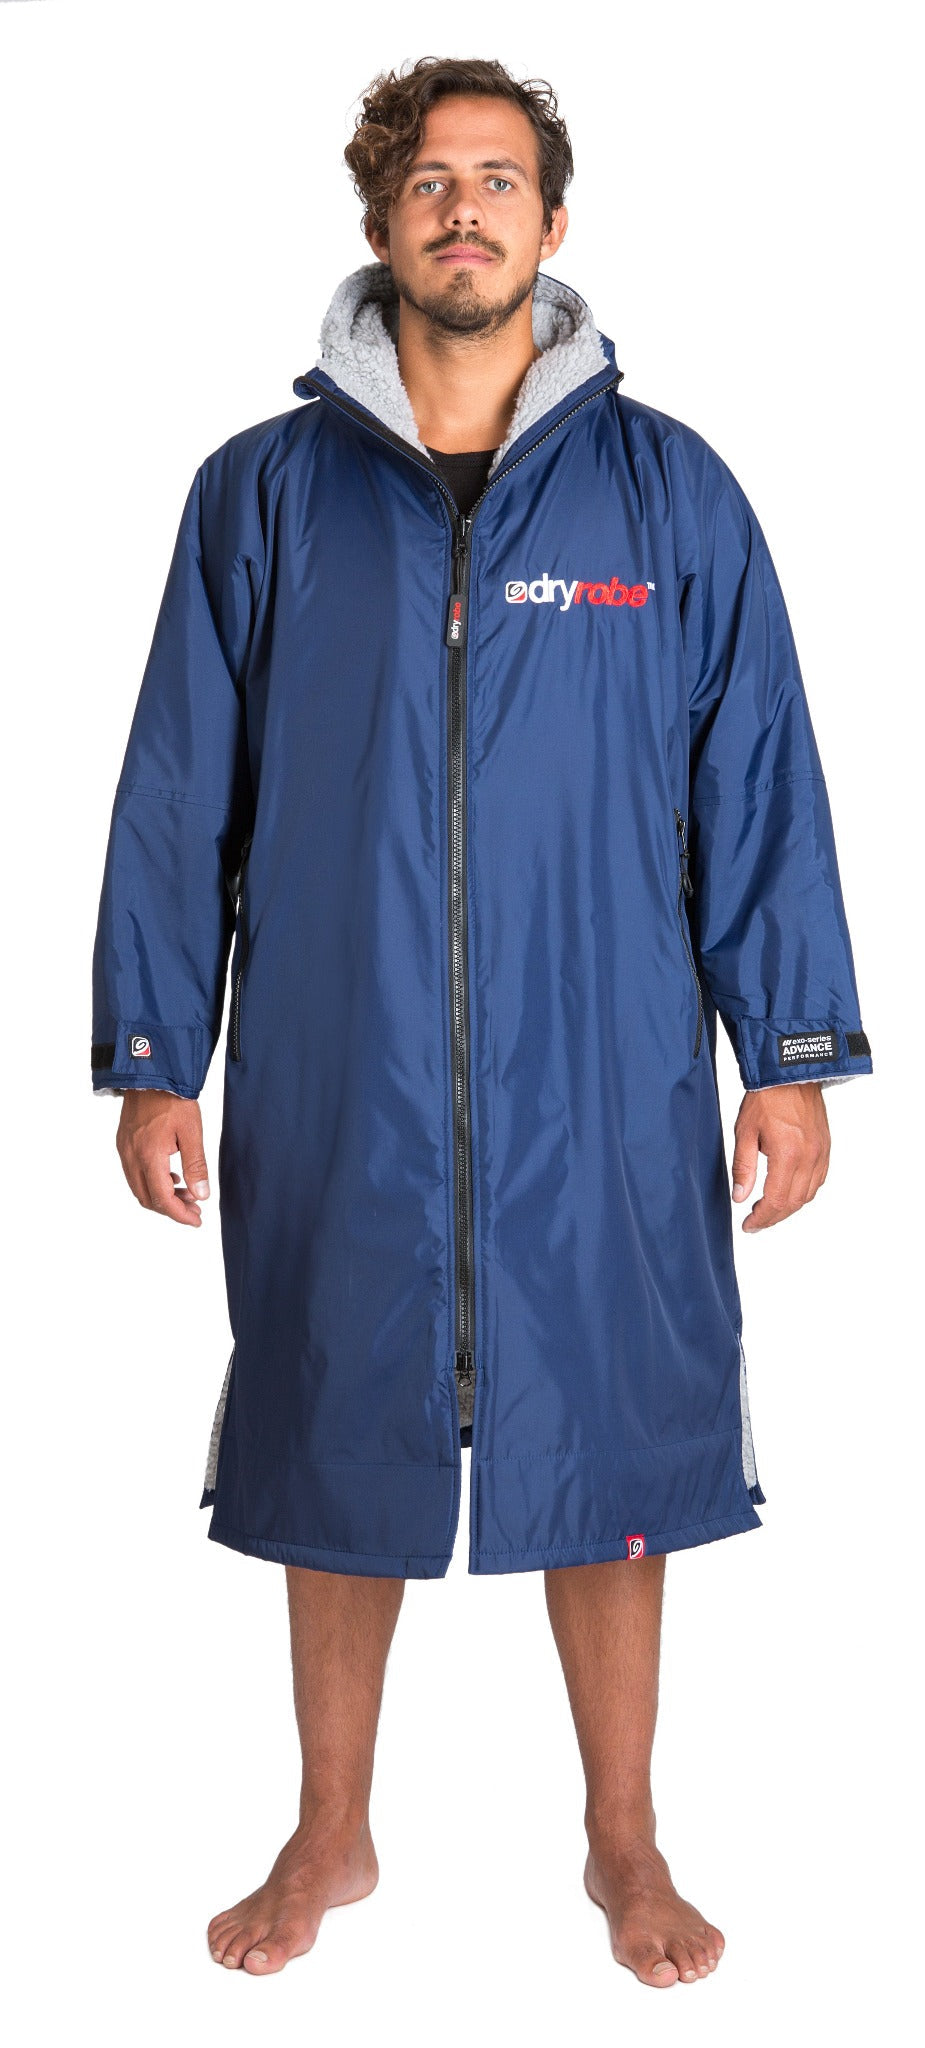 dryrobe Advance Long Sleeve | Navy/Grey modelled front view